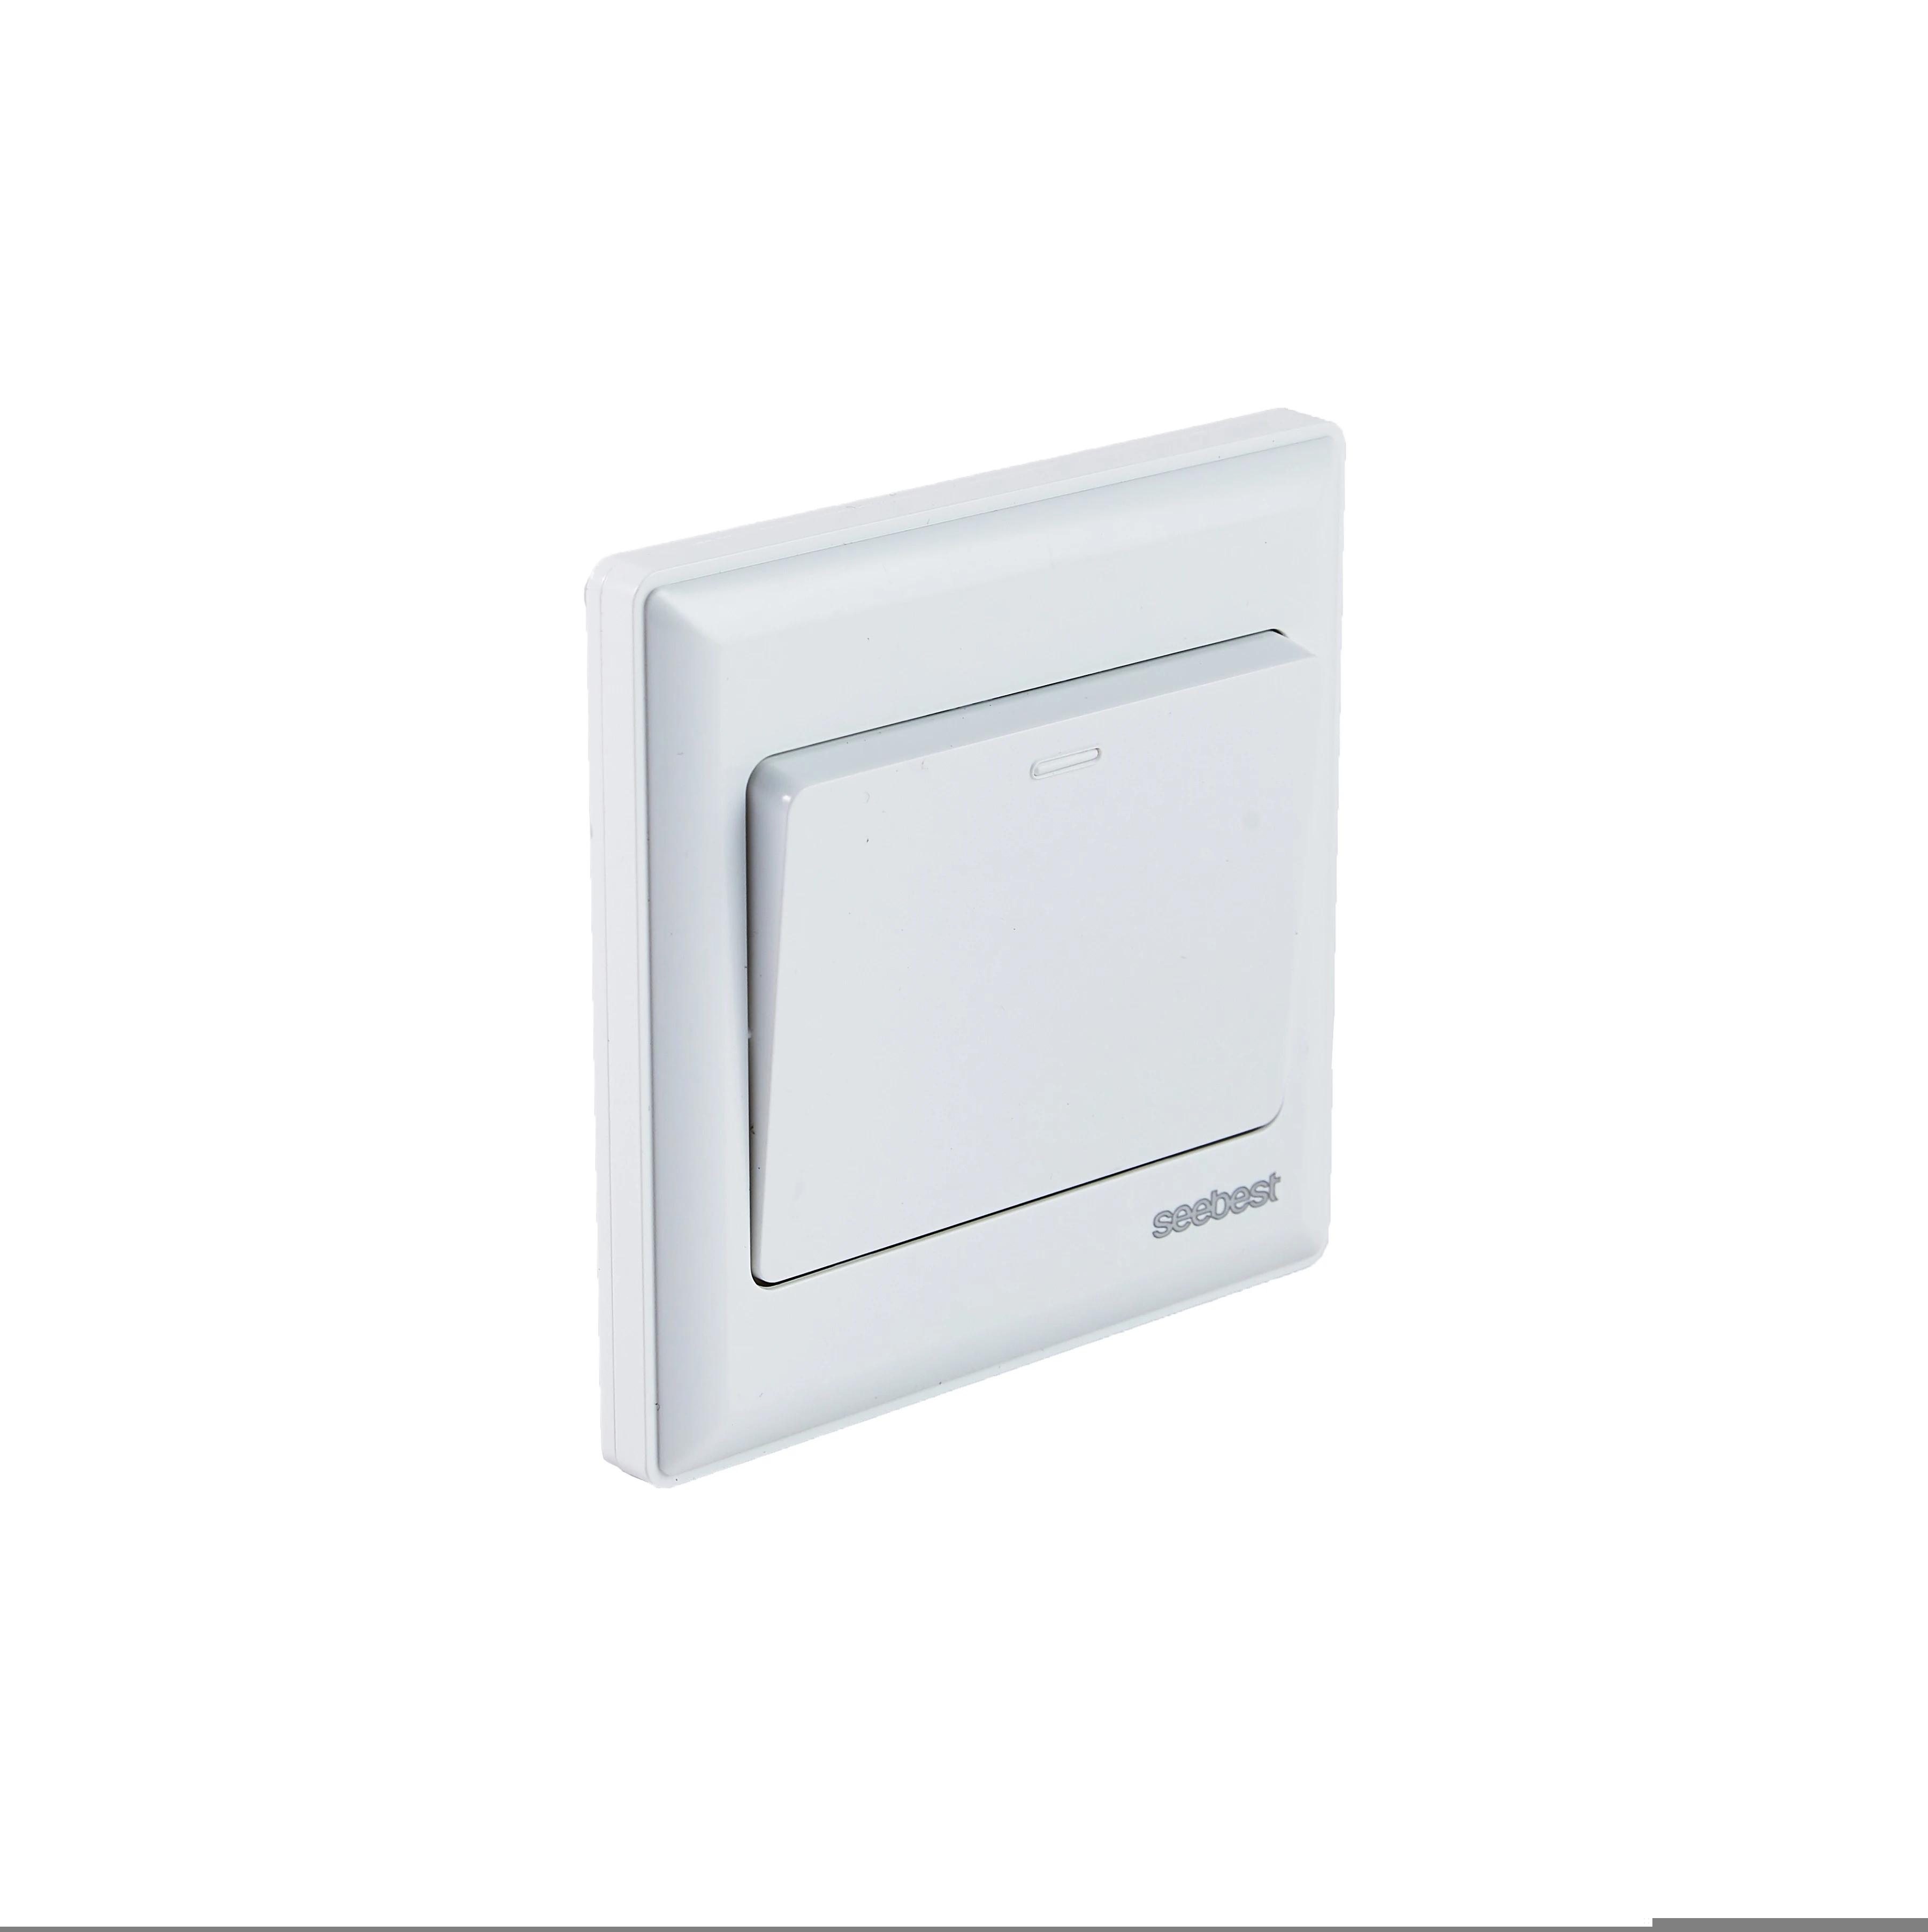 Seebest Hot Sale UK Standard 12 3 4 Way Wall Switch /Sockets And Switches For Home